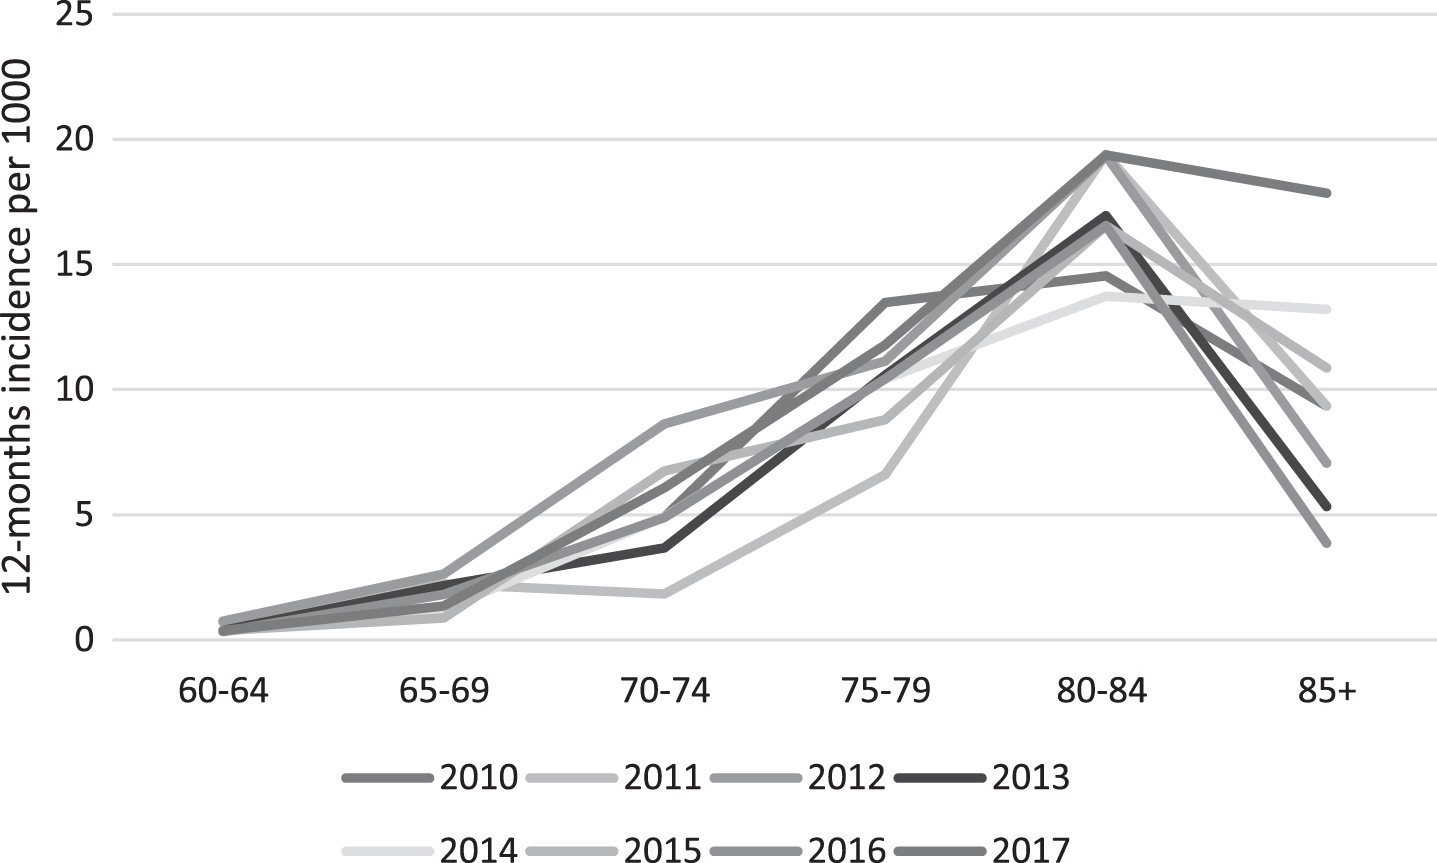 Trend in age-specific, sex-standardized incidence of dementia in the Faroe Islands, by year. Standardization is done using the 2010 Faroese population as standard.